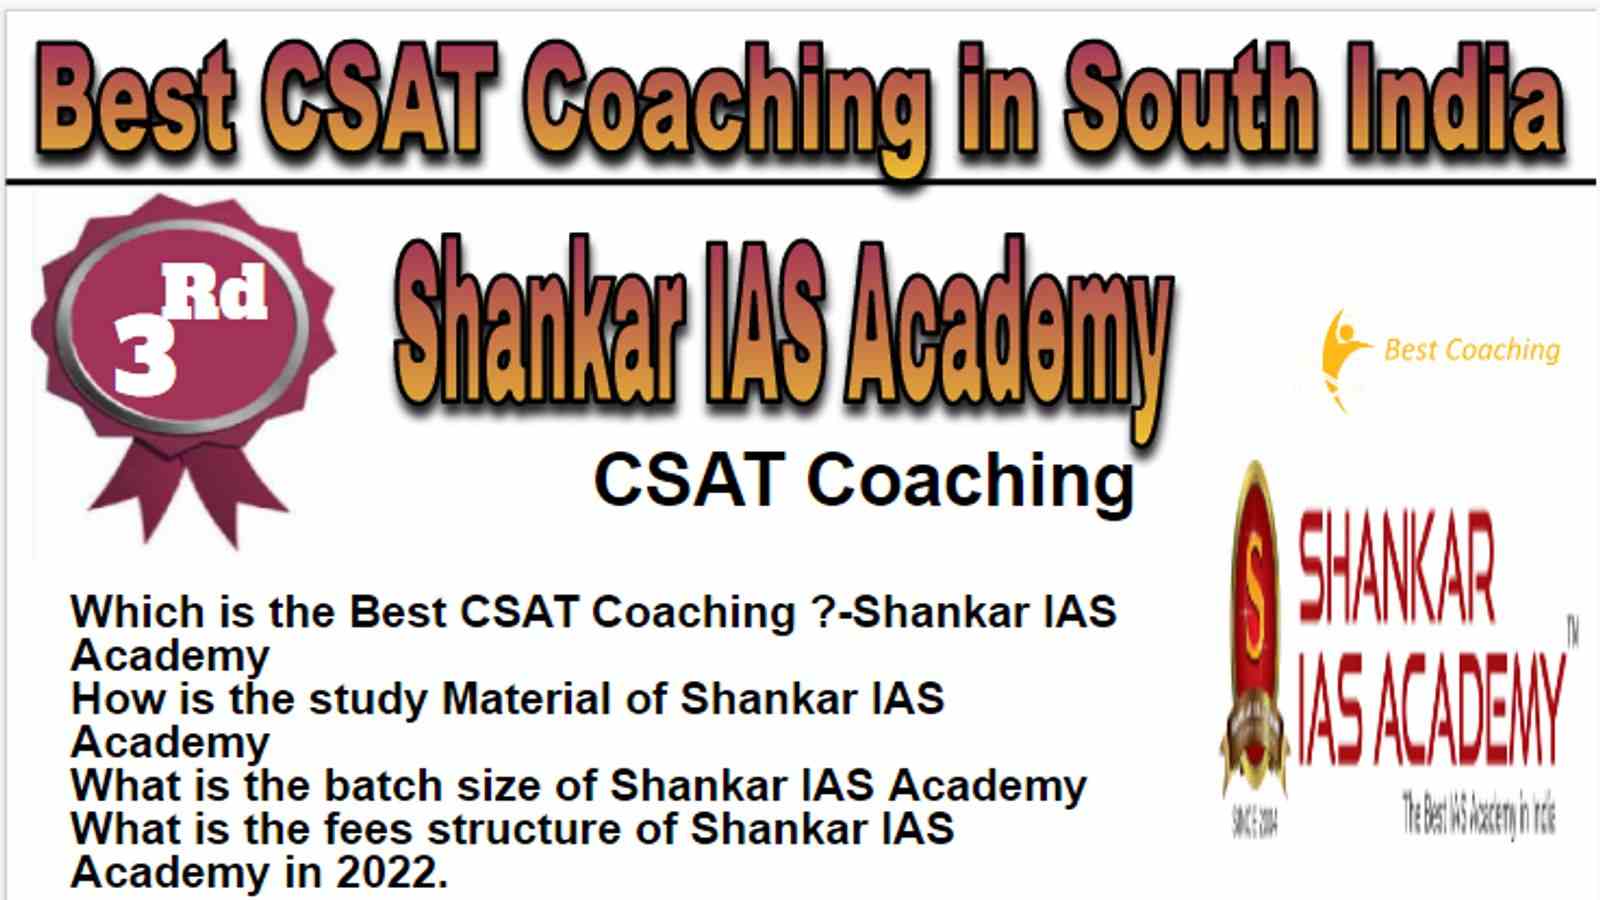 Rank 3 Best CSAT Coaching in South India